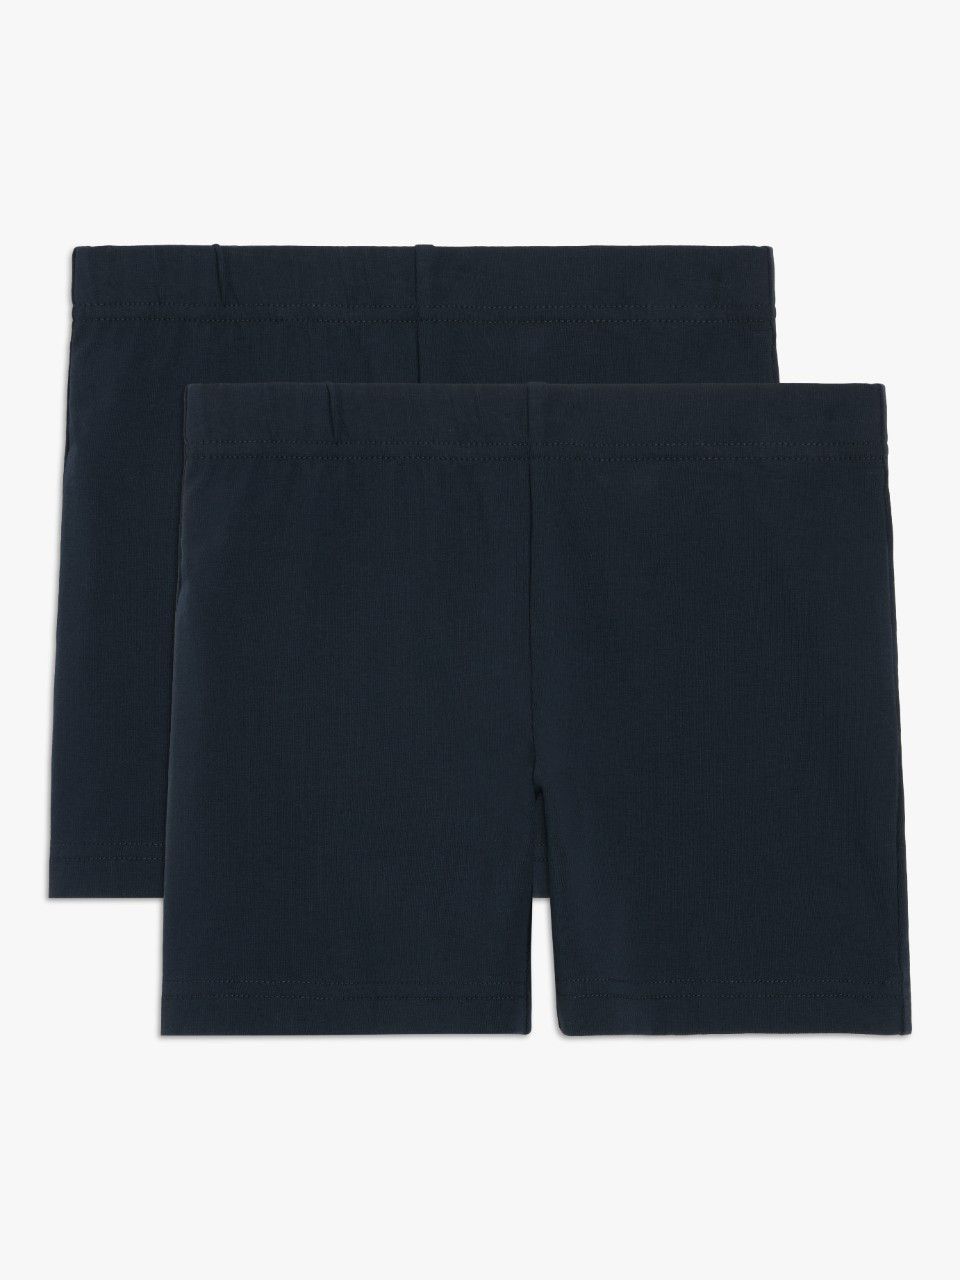 John Lewis ANYDAY Kids' Cycle School Shorts, Pack of 2, Navy, 32